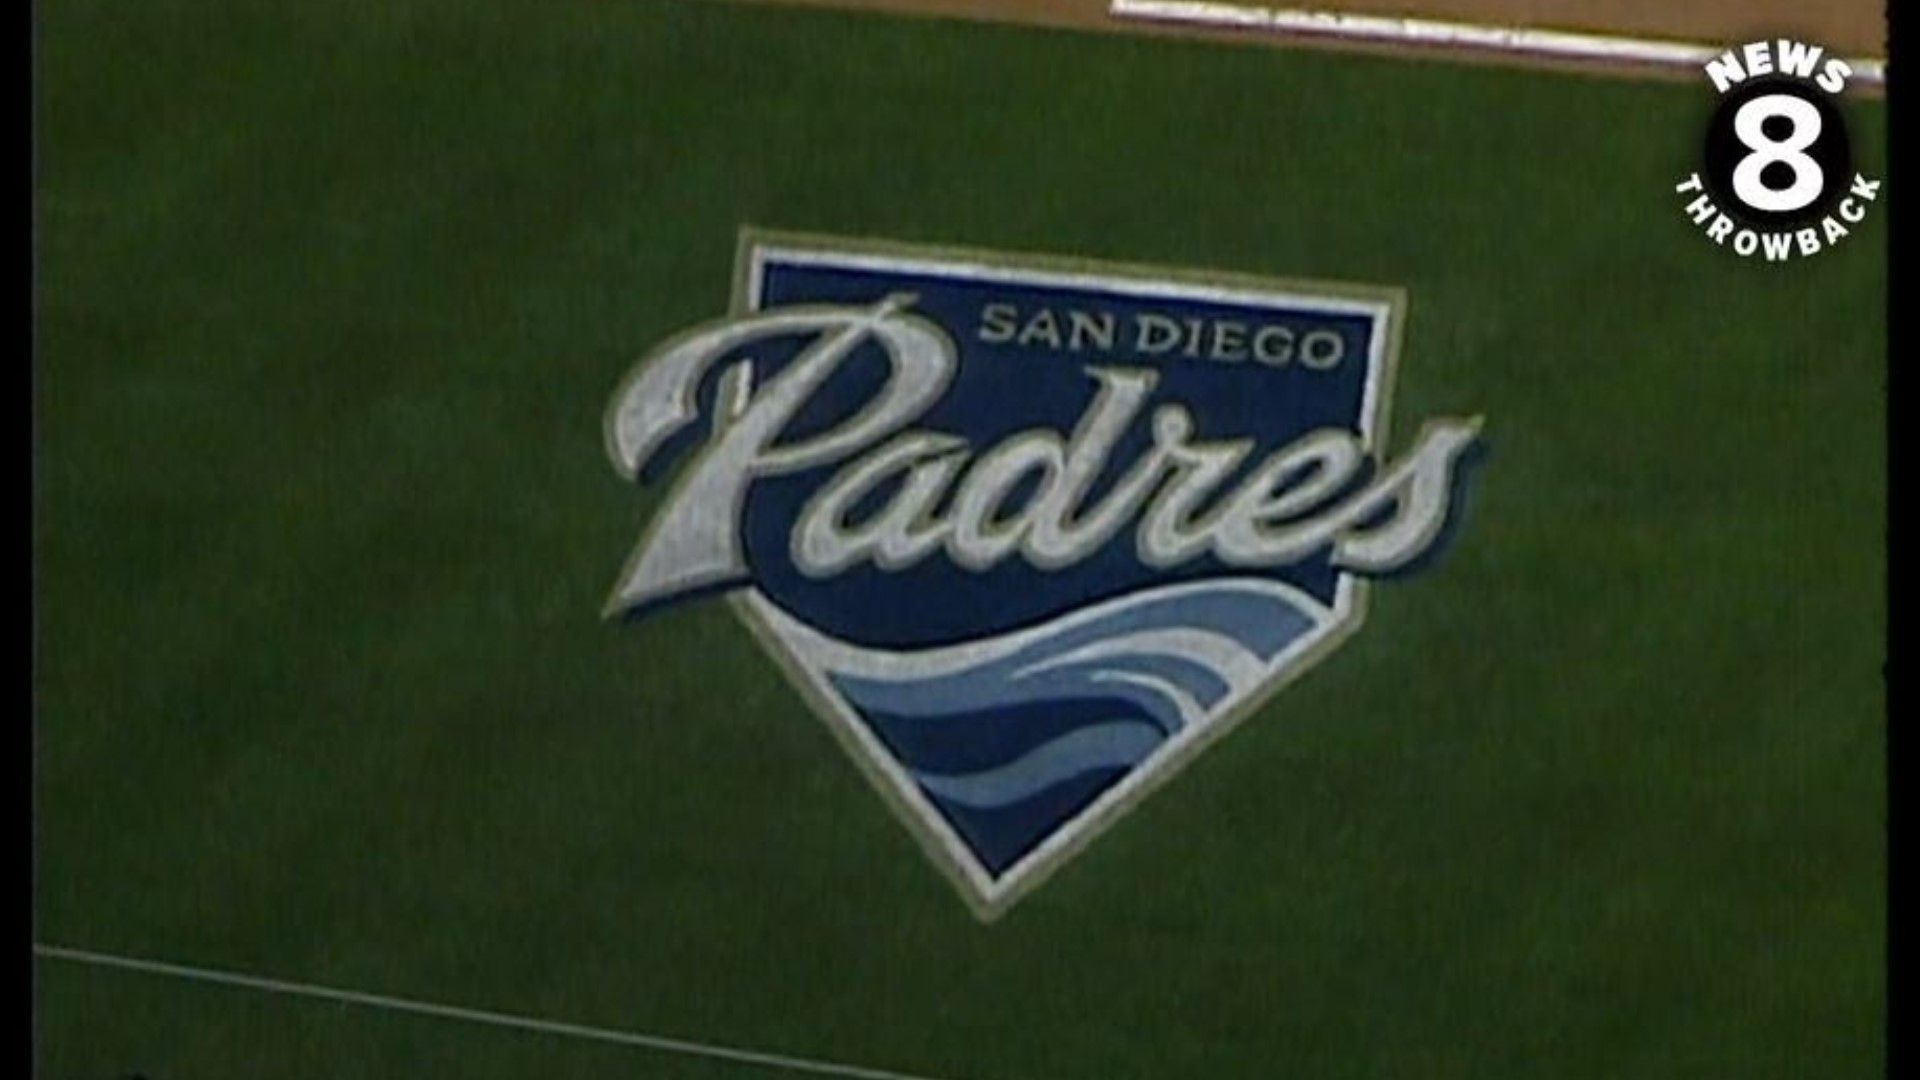 Petco Park is celebrating 20 years in Downtown San Diego. Take a look back at the park's Opening Day on Apri 4, 2004.